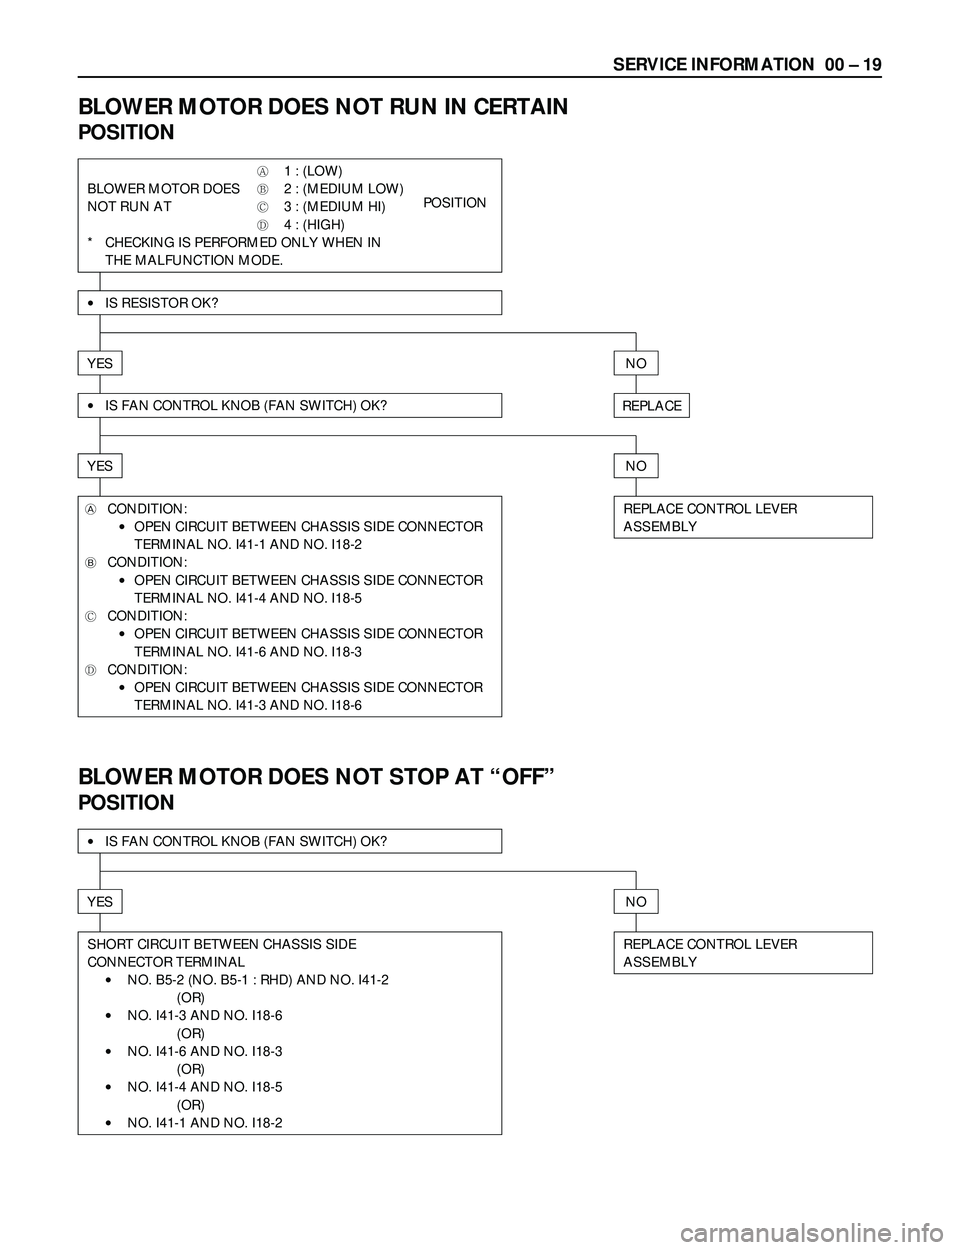 ISUZU TROOPER 1998  Service Workshop Manual SERVICE INFORMATION  00 Ð 19
BLOWER MOTOR DOES NOT RUN IN CERTAIN
POSITION
A1 : (LOW)
BLOWER MOTOR DOES
B2 : (MEDIUM LOW)
NOT RUN AT
C3 : (MEDIUM HI)          POSITION
D4 : (HIGH)
* CHECKING IS PERFO